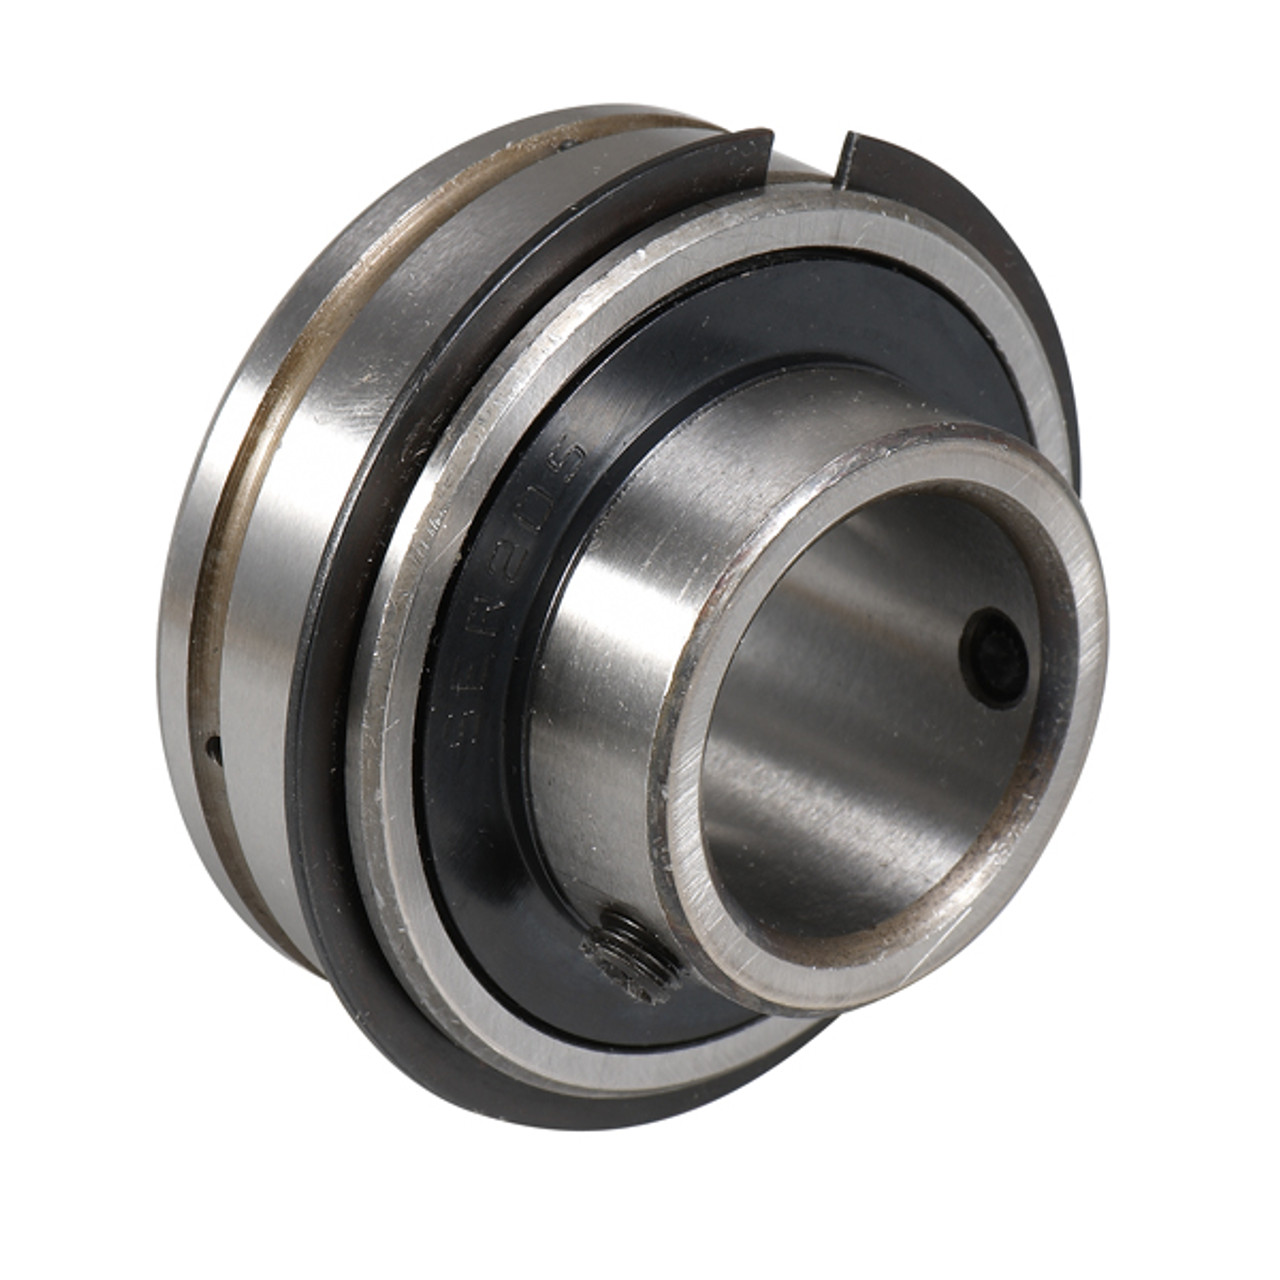 SER207-20 GENERIC 31.75mm Normal duty bearing insert with a parallel outer race and grubscrew locking - Imperial Thumbnail